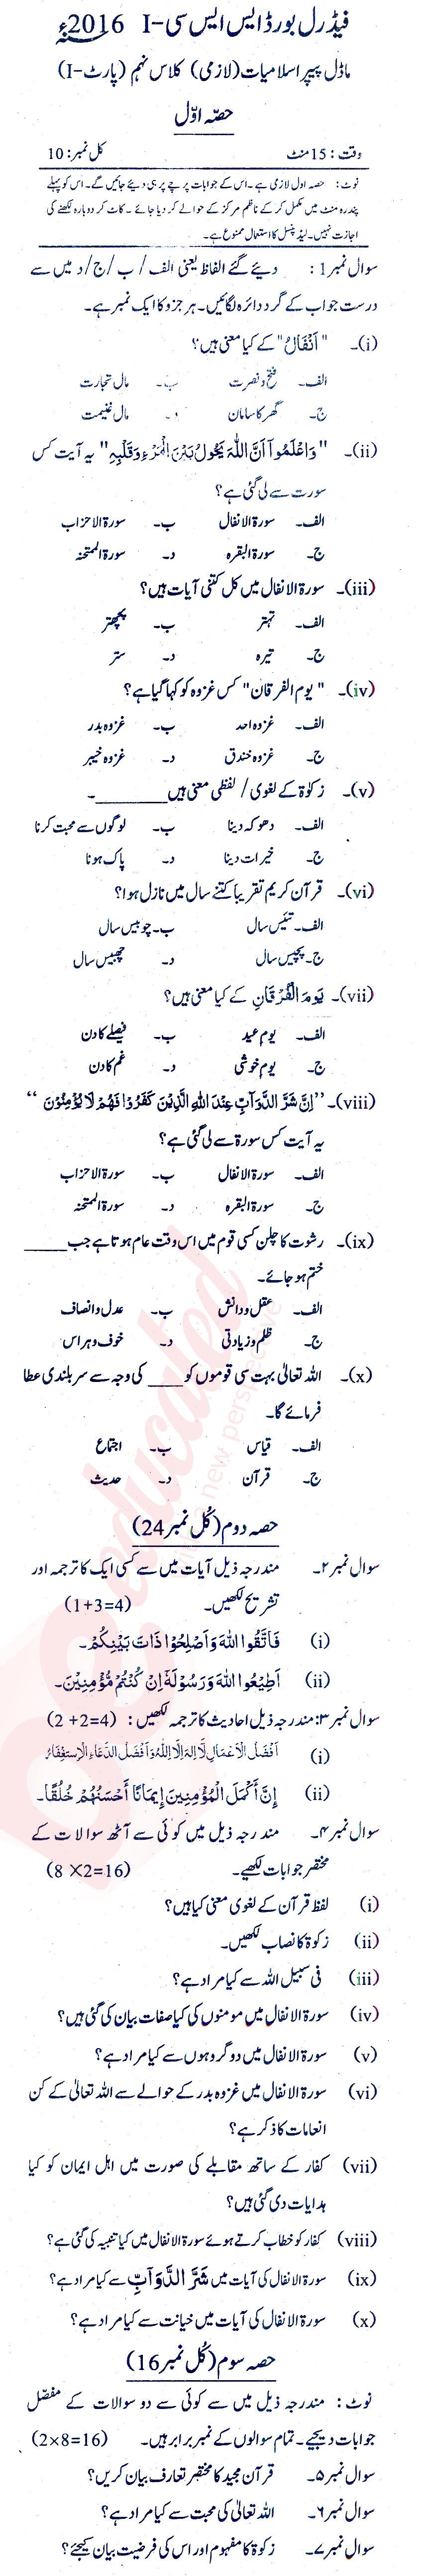 Islamiat (Compulsory) 9th class Past Paper Group 1 Federal BISE  2016